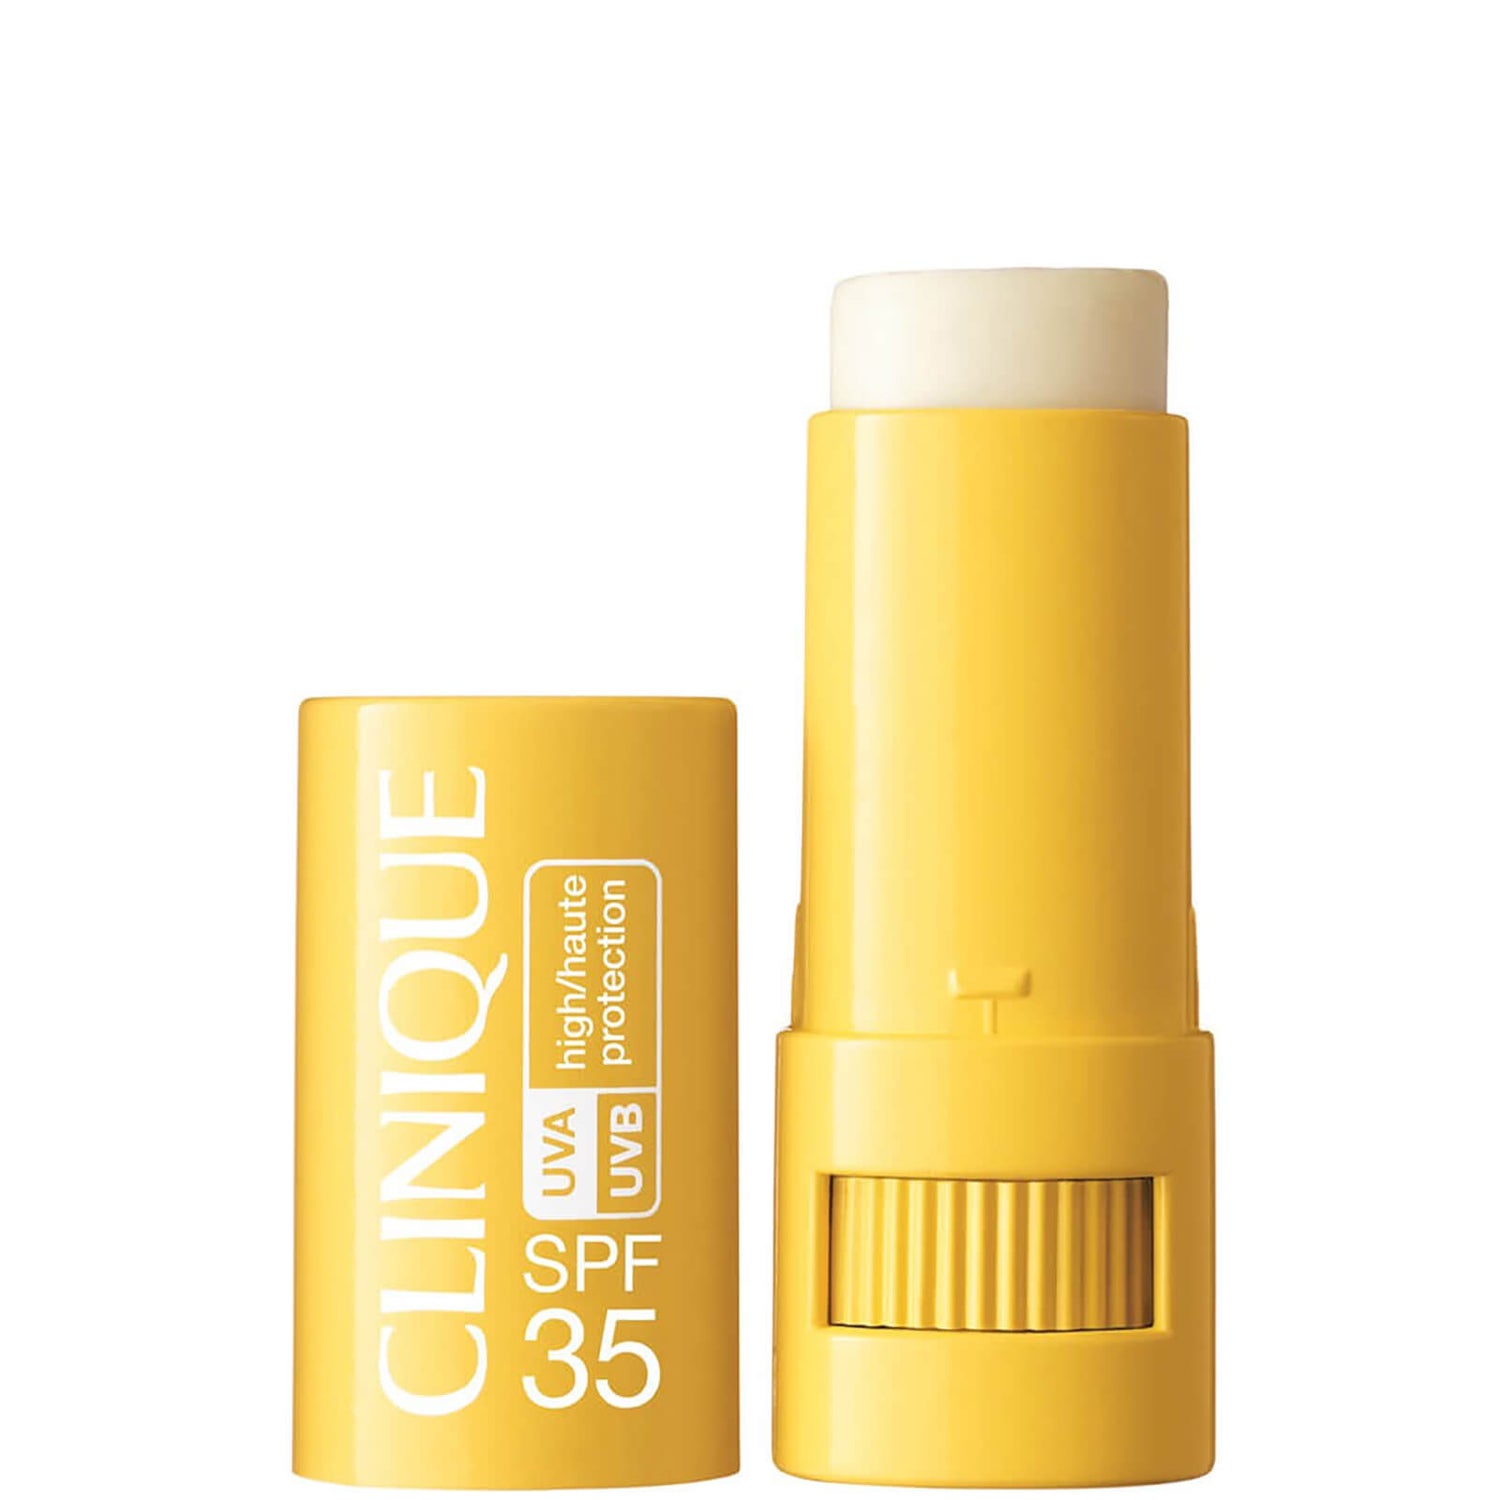 Clinique SPF35 Targeted Protection Stick 6g